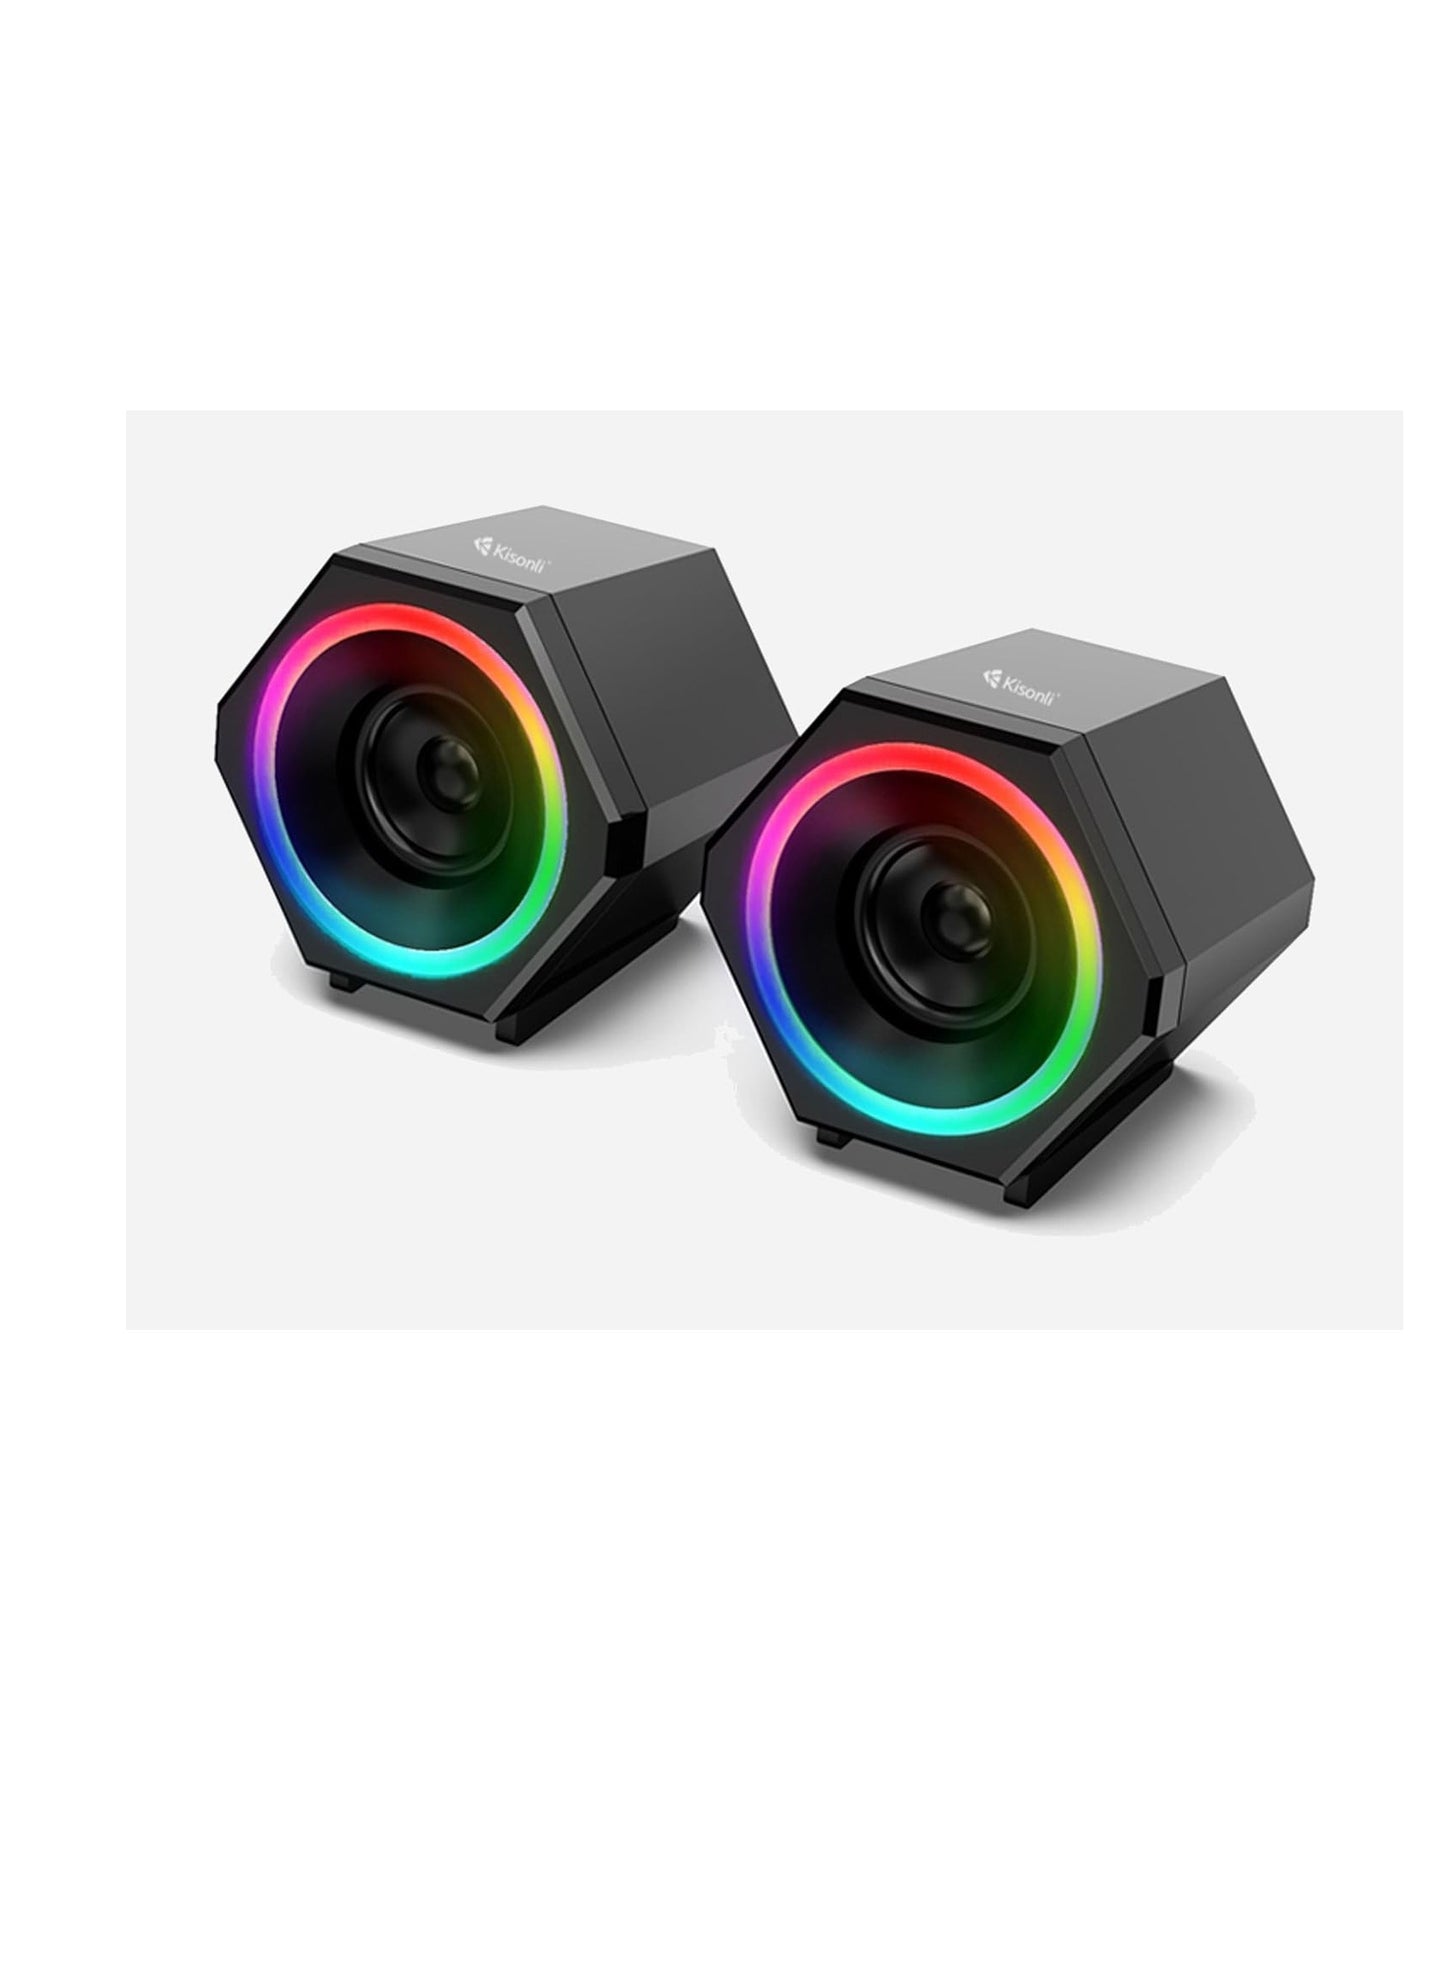 Kisonli Music Speaker For Gaming RGB colorful lights, stereo sound, good quality, can connect pc, laptop, mp3, mp4 , l-6060